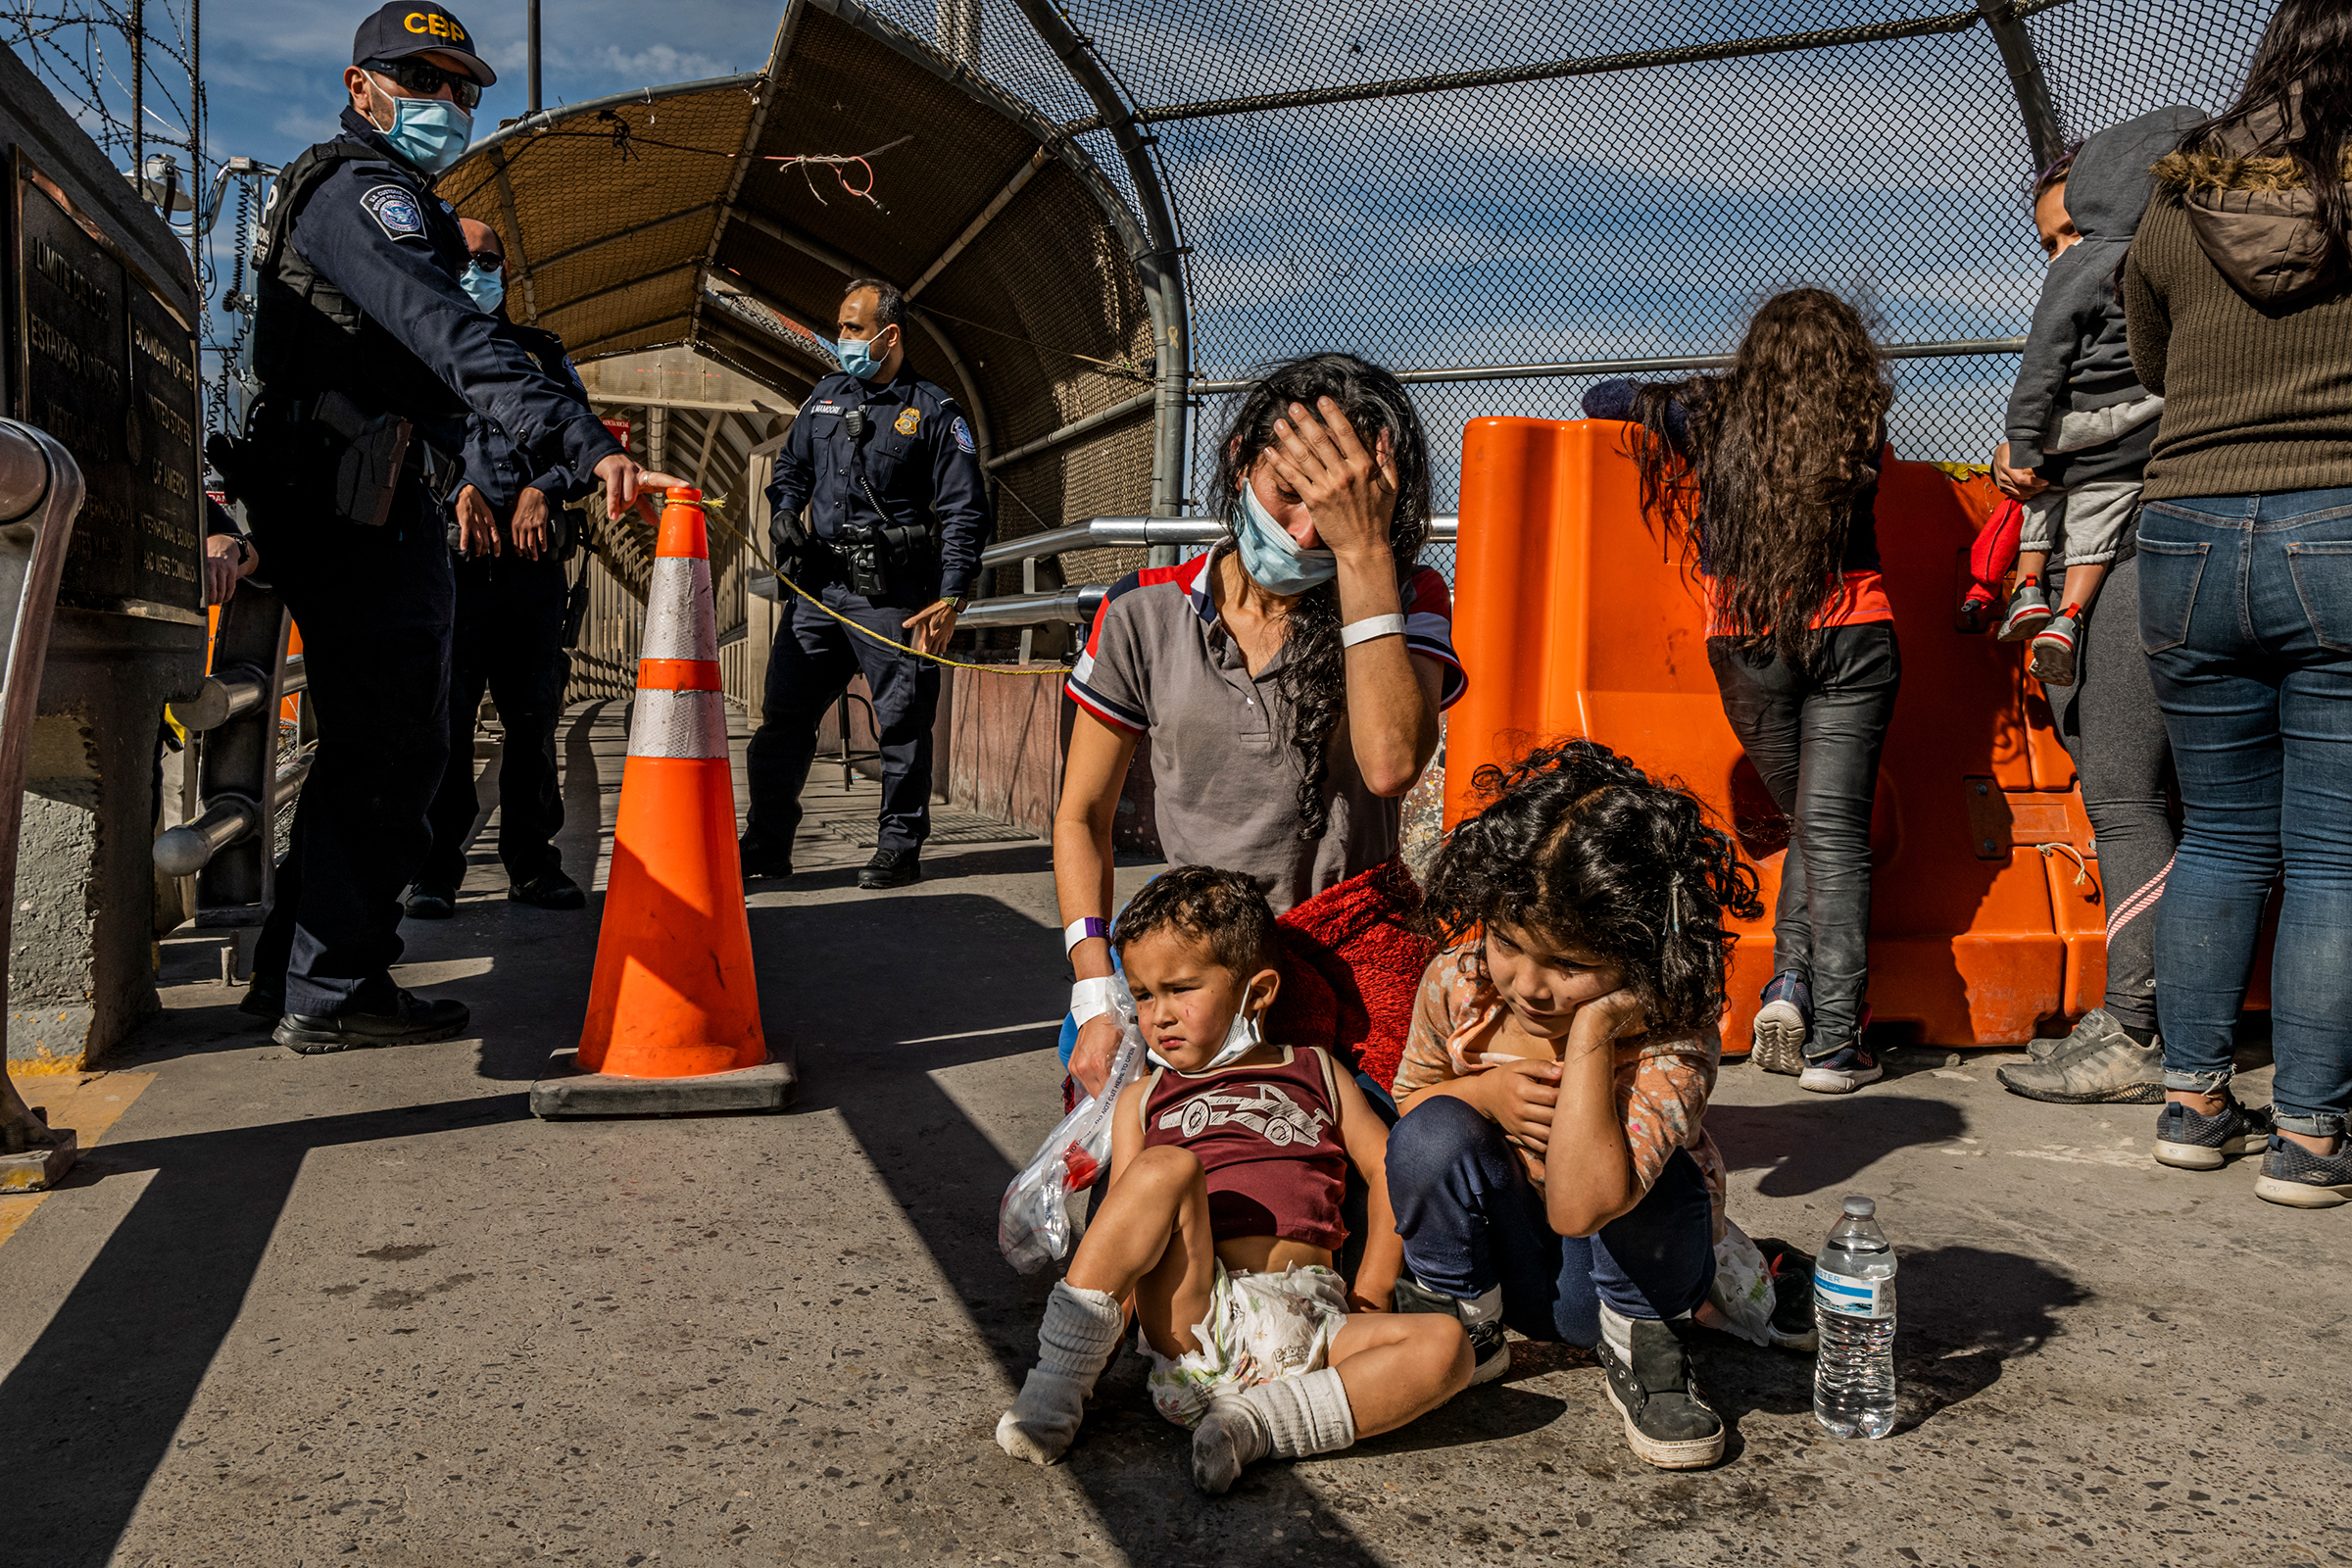 Vilma Iris Peraza, 28, from Honduras cries next to her two children, Adriana, 5, and Erick, 2, after finding out they were <a href="https://www.nytimes.com/2021/03/19/world/americas/mexico-border-deportations.html">back in Mexico</a> on March 18. They had just been escorted by U.S. border patrol agents to the middle of the Paso del Norte International Bridge in Ciudad Juarez. Peraza was planning to reunite with her husband, who had been living in Nashville for two years. (Daniel Berehulak—The New York Times/MAPS)